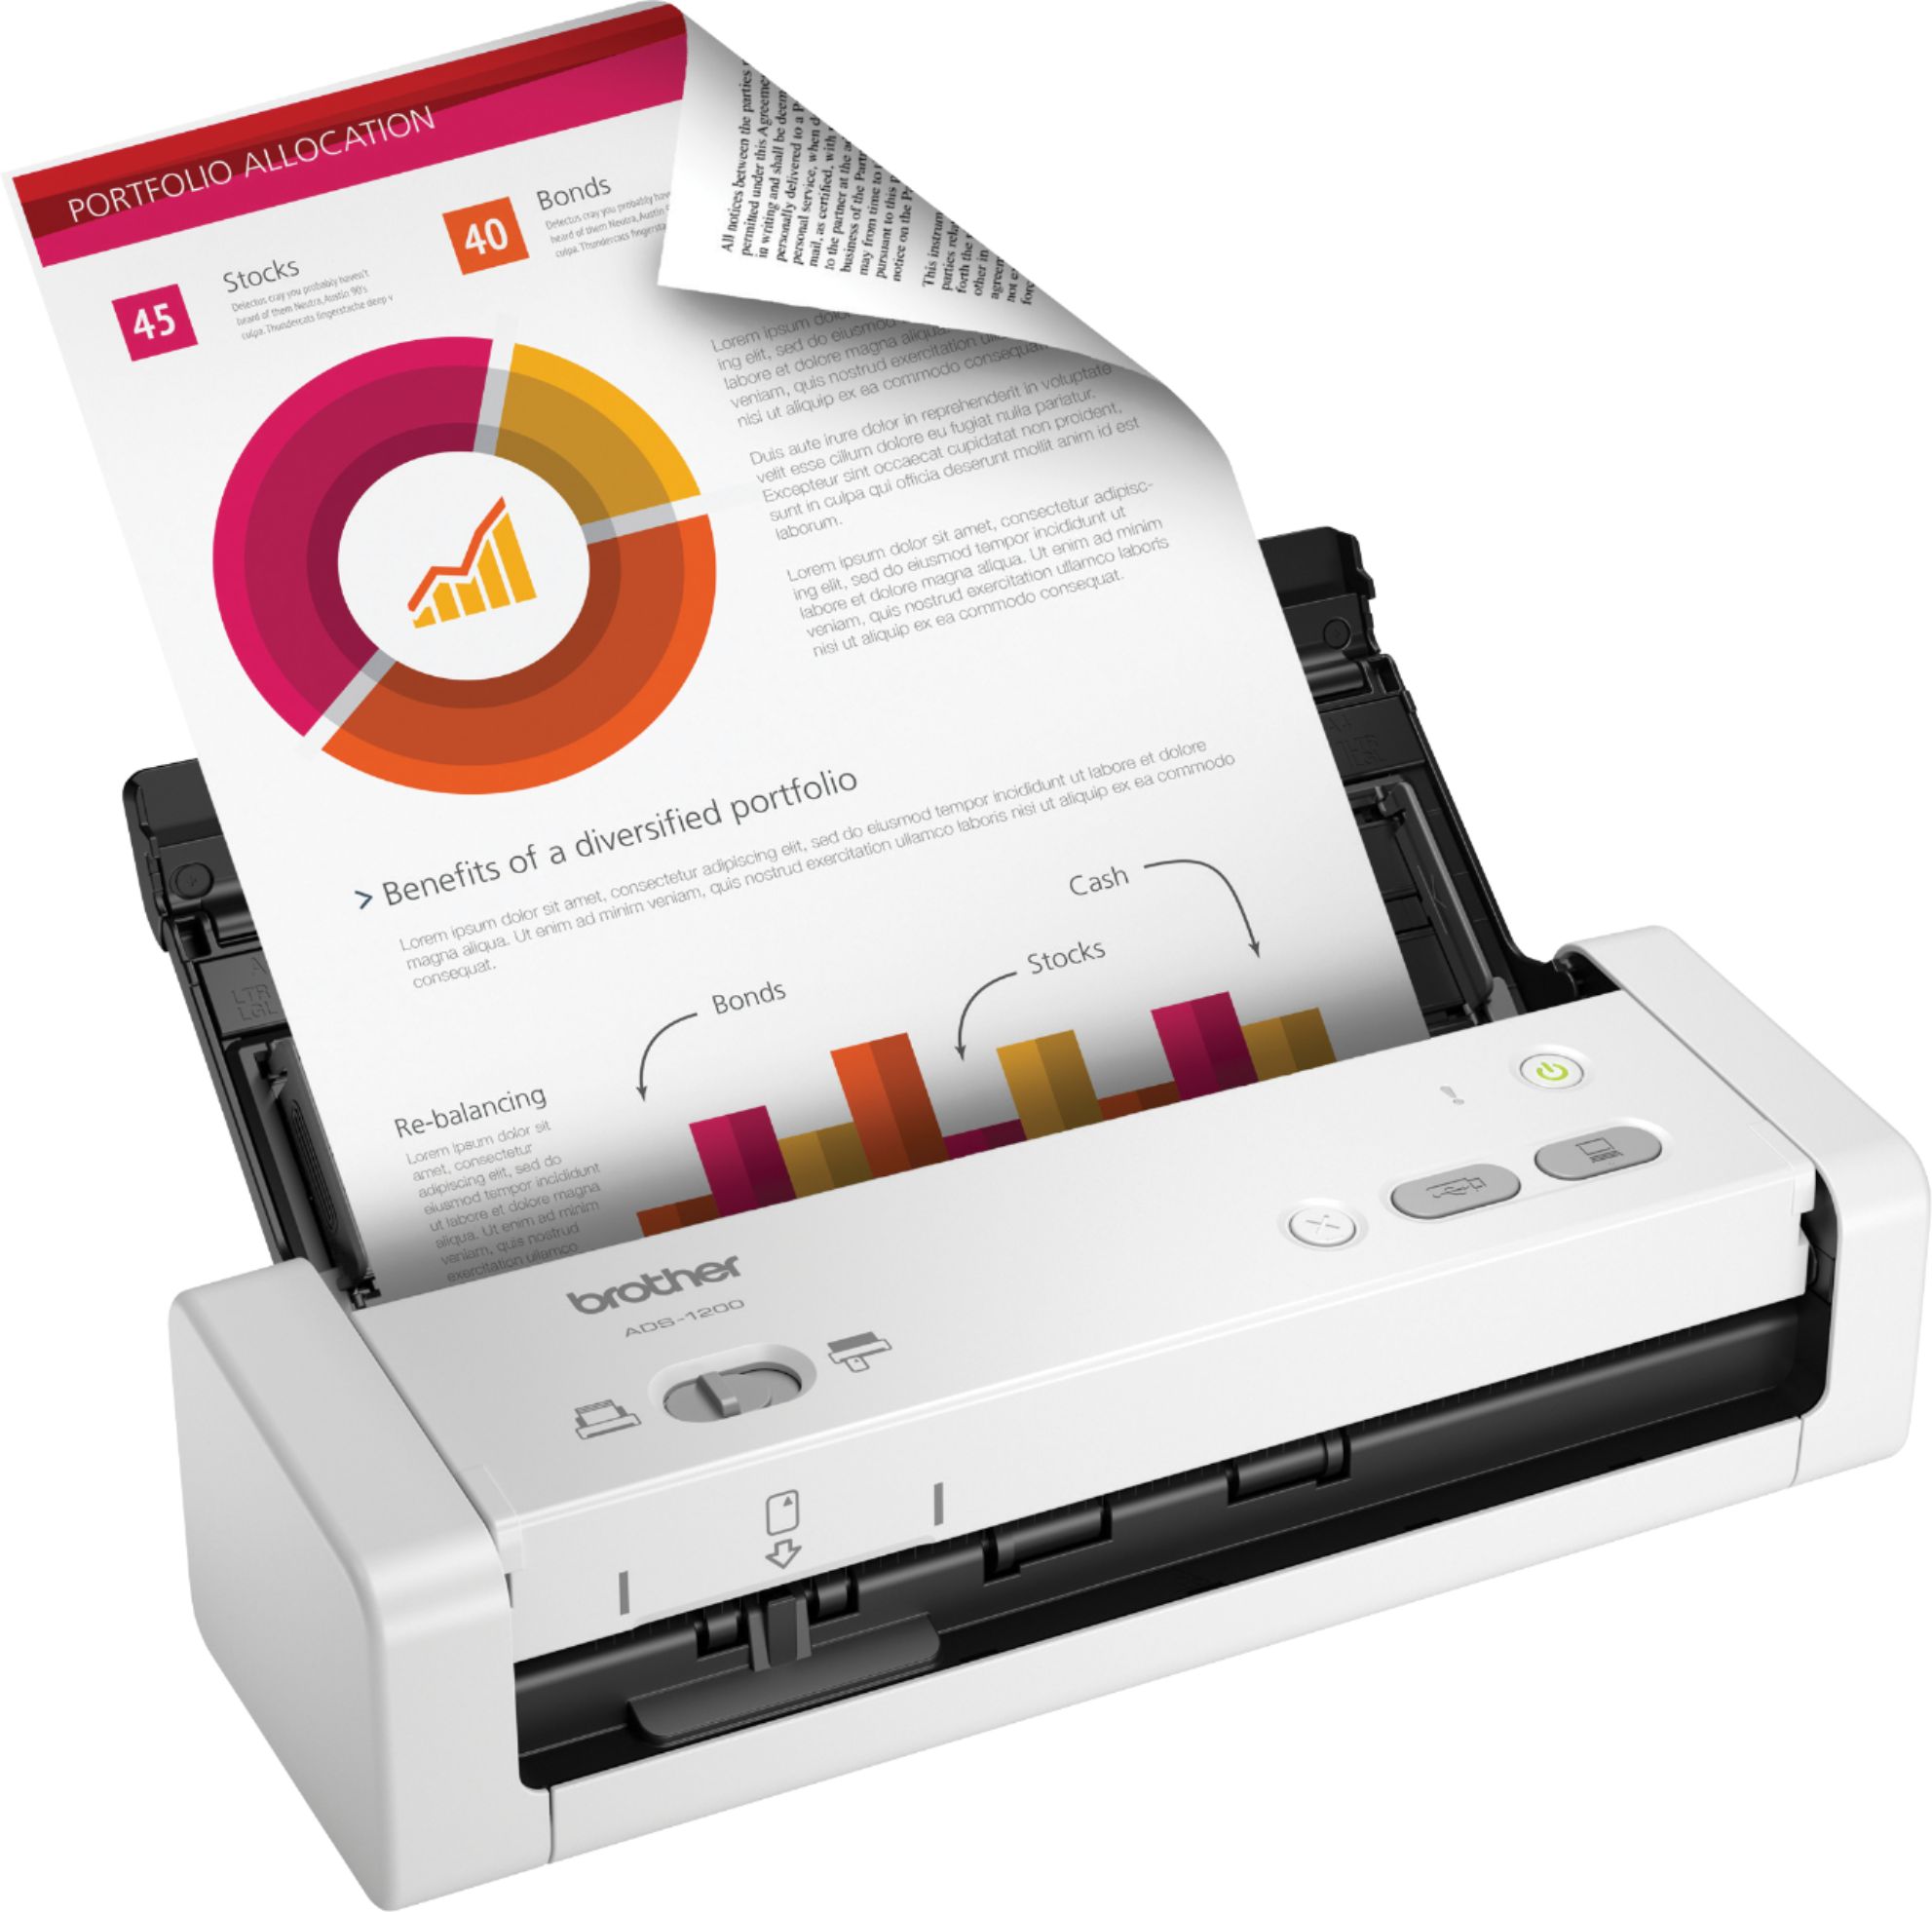 Angle View: Epson - RapidReceipt RR-60 Mobile Receipt and Color Document Scanner - White